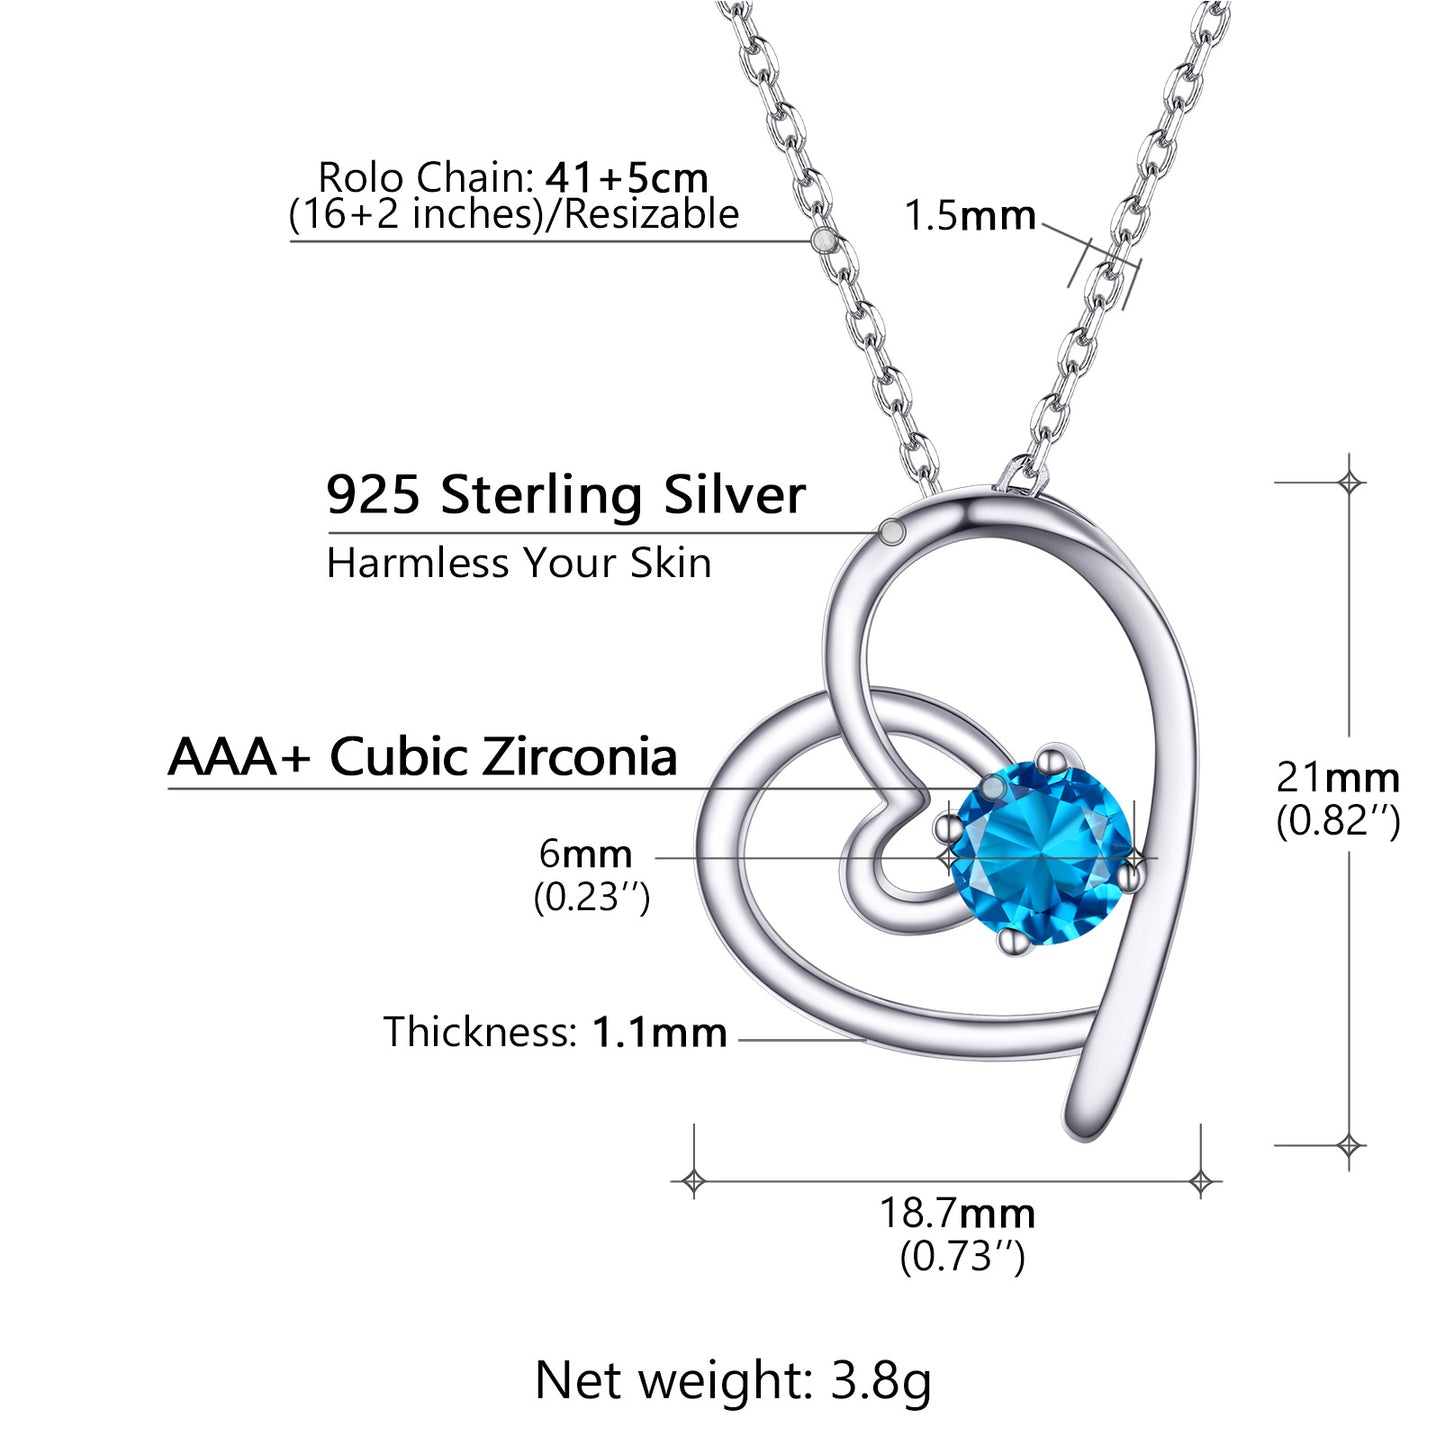 Sterling Silver Birthstone Heart Necklace For Women